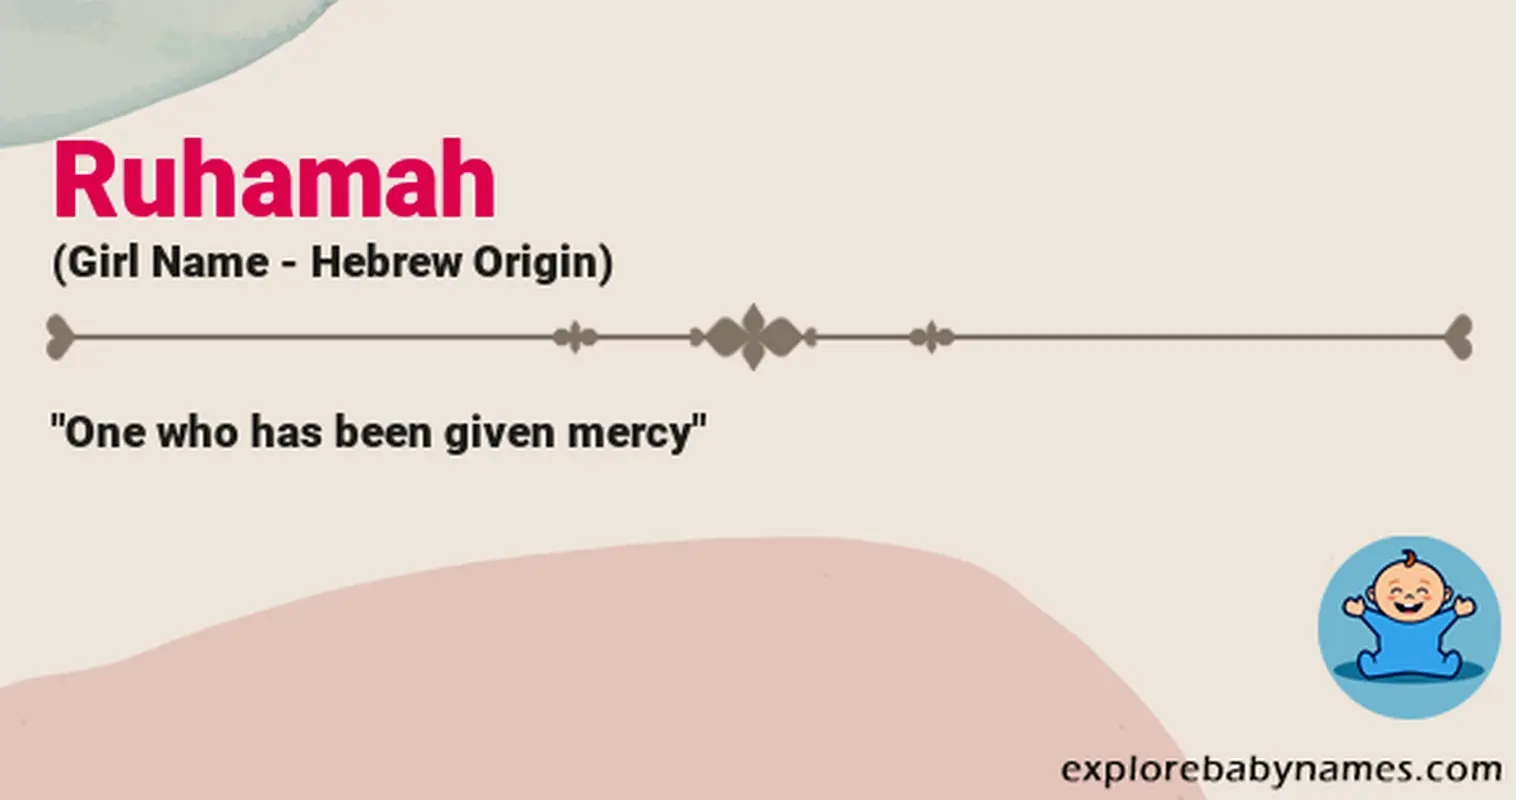 Meaning of Ruhamah